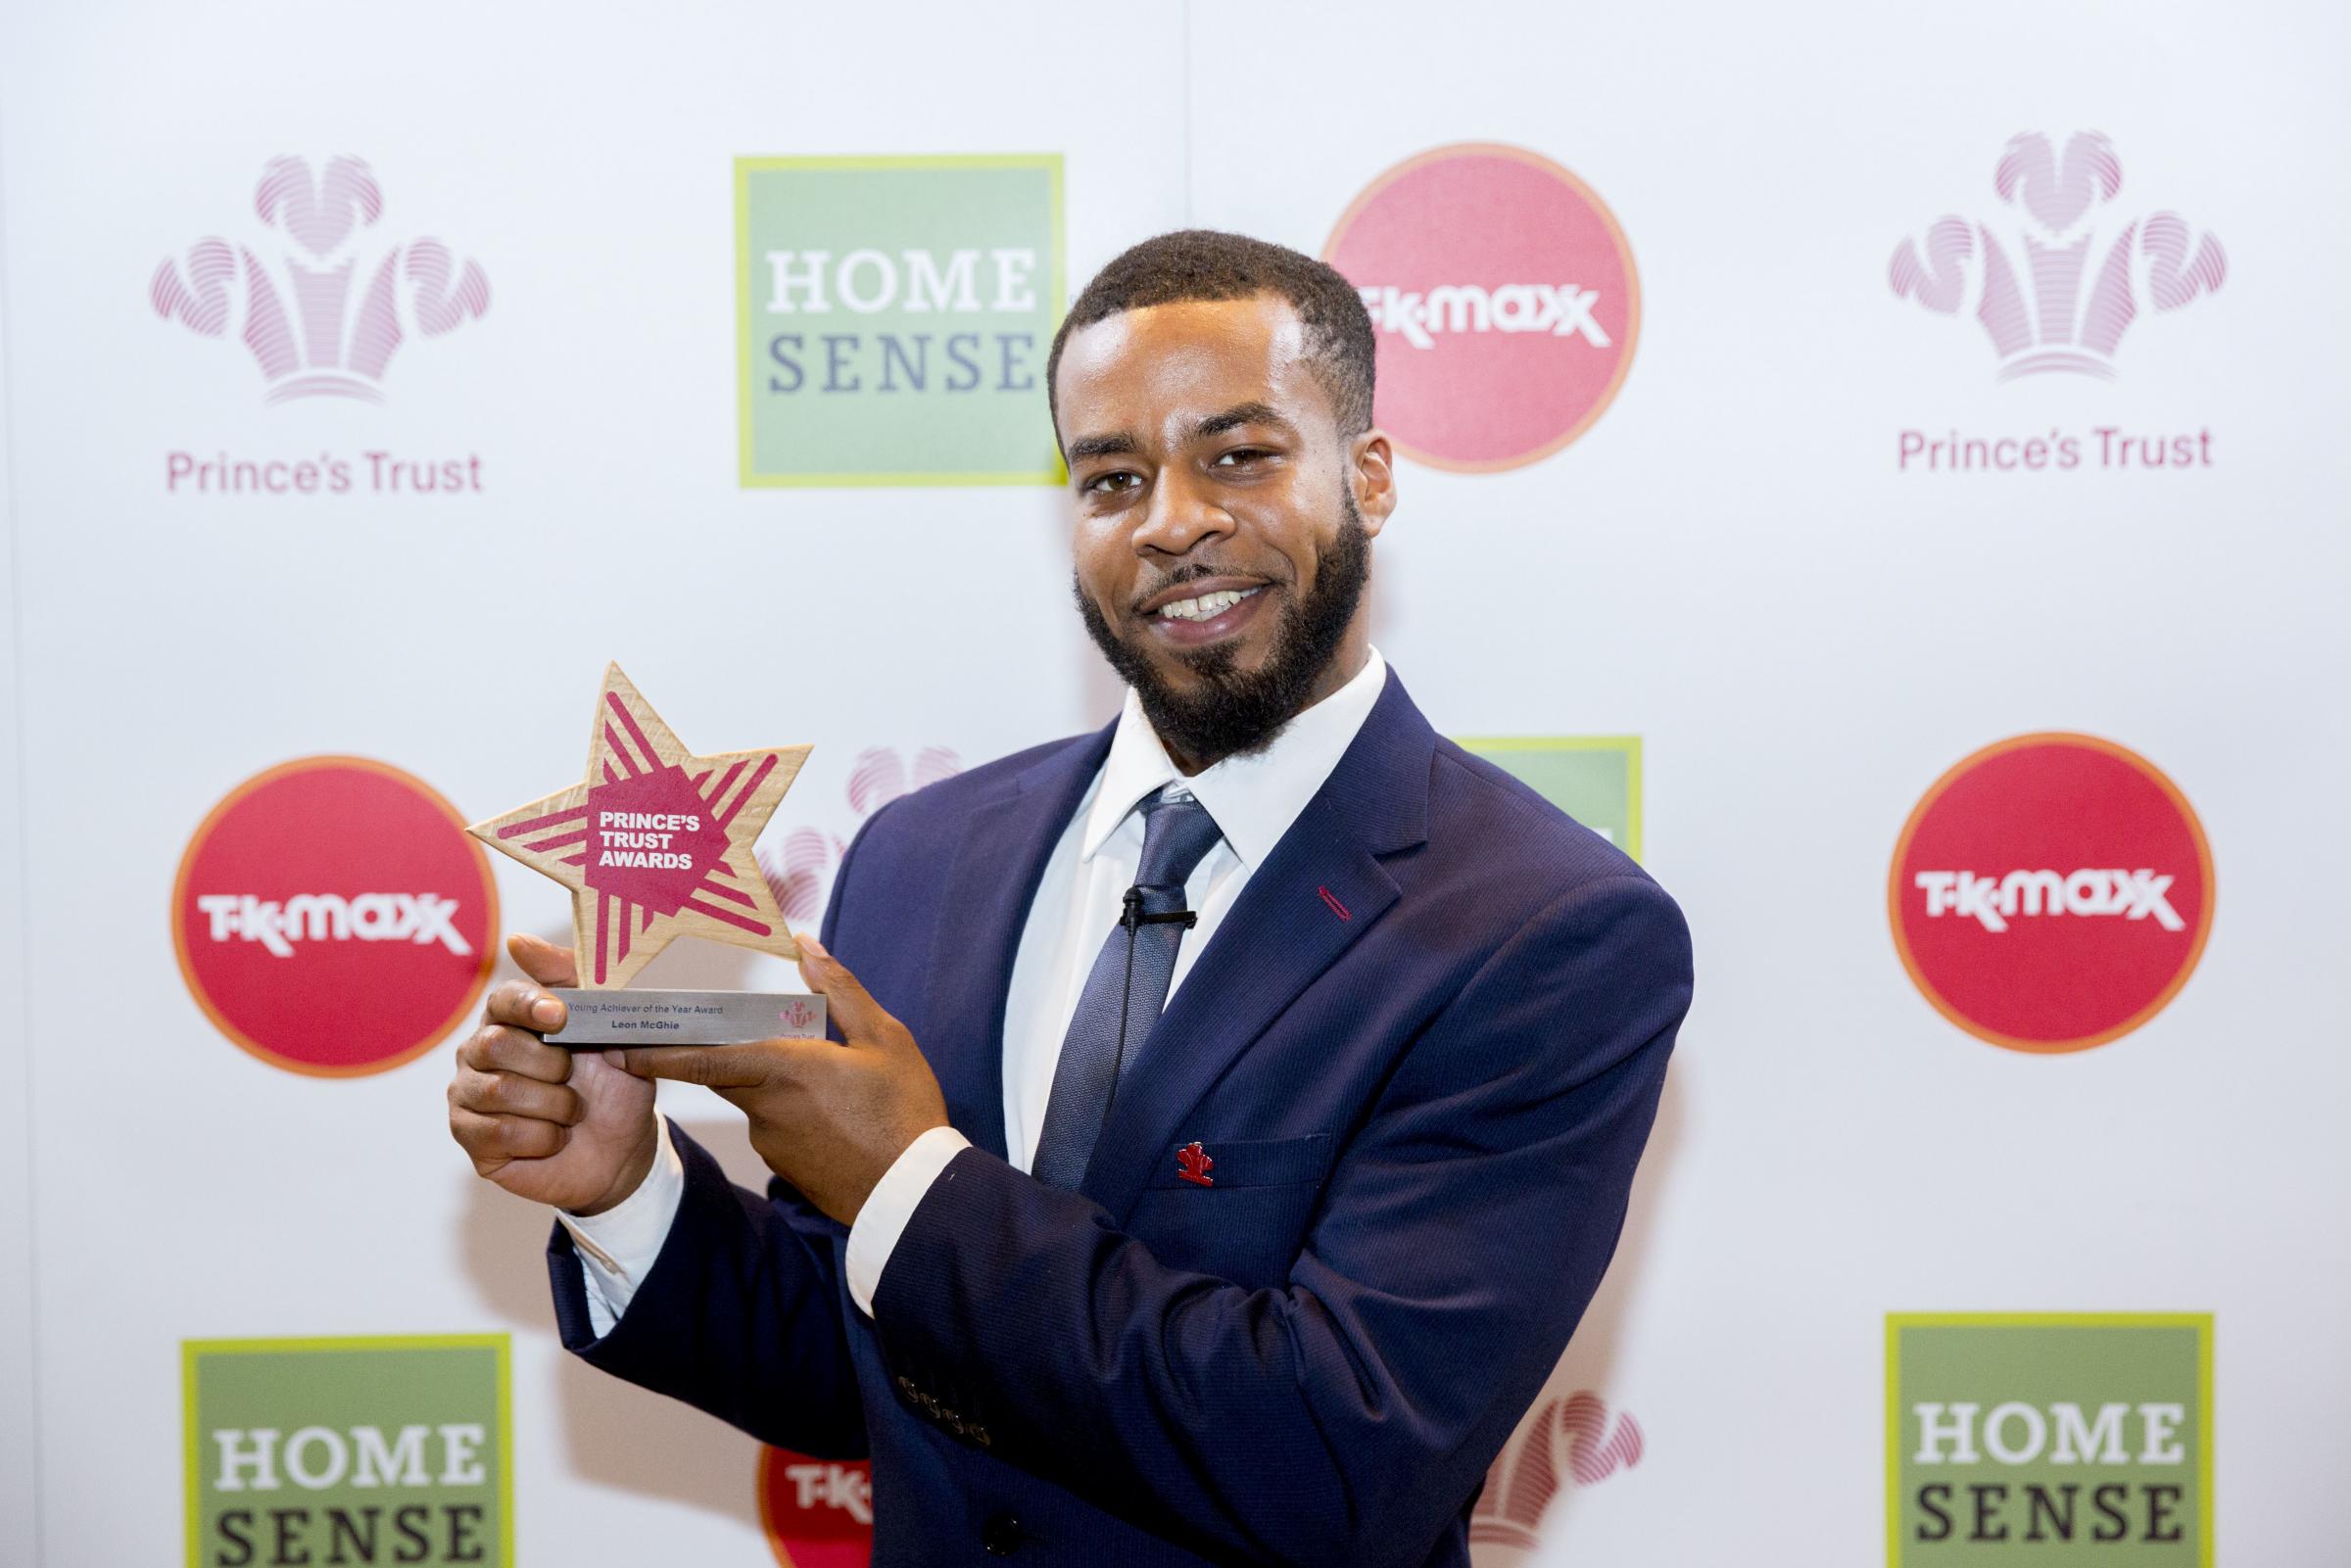 Ex-gang member from Tottenham wins award after turning life around